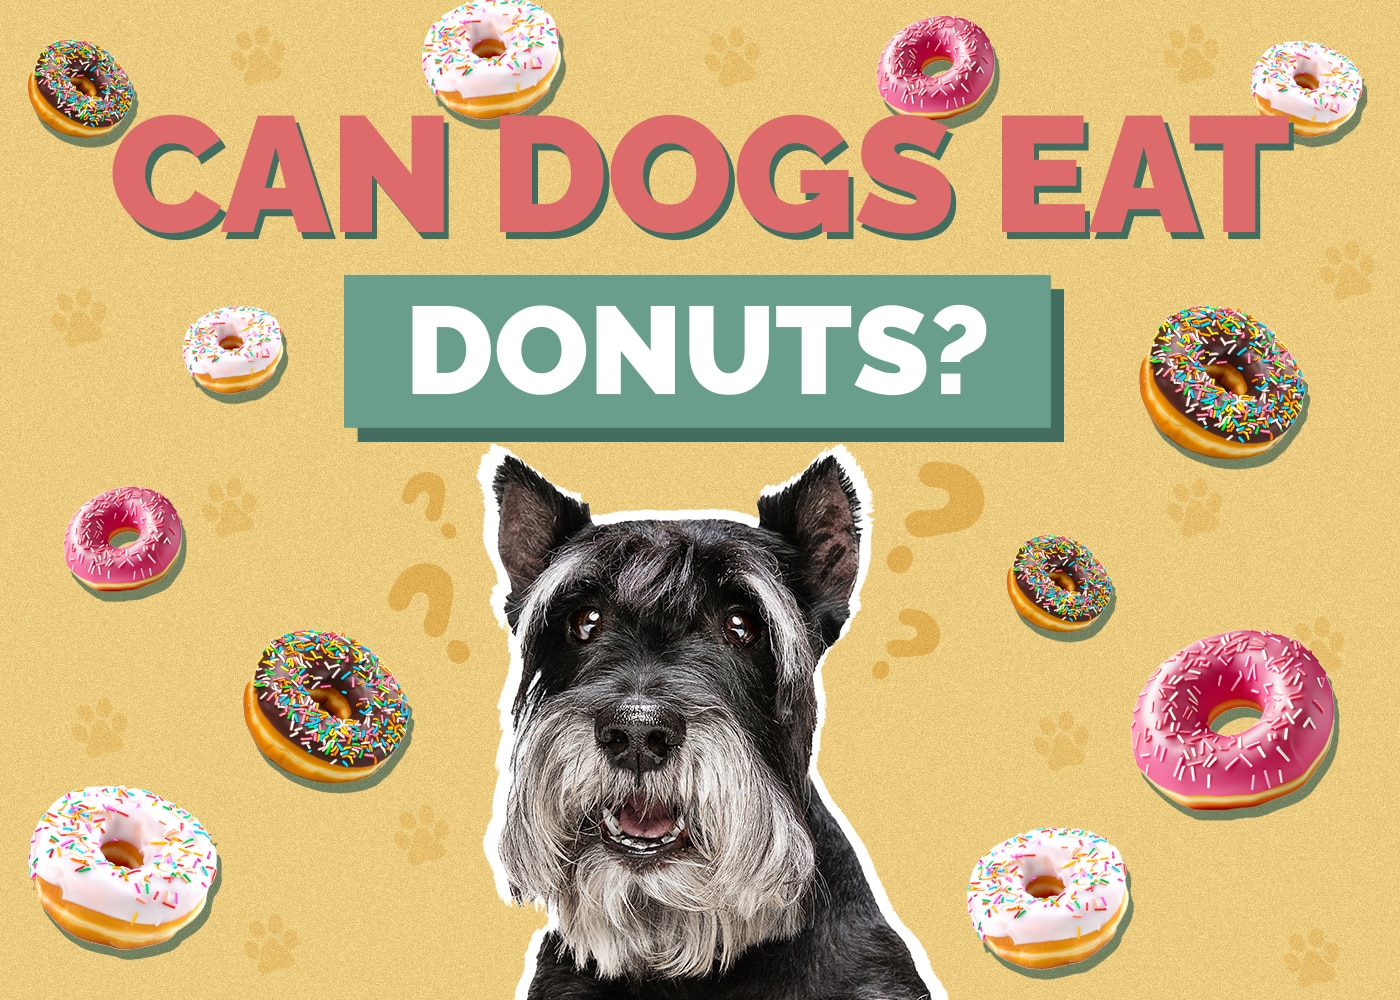 Can Dog Eat donuts